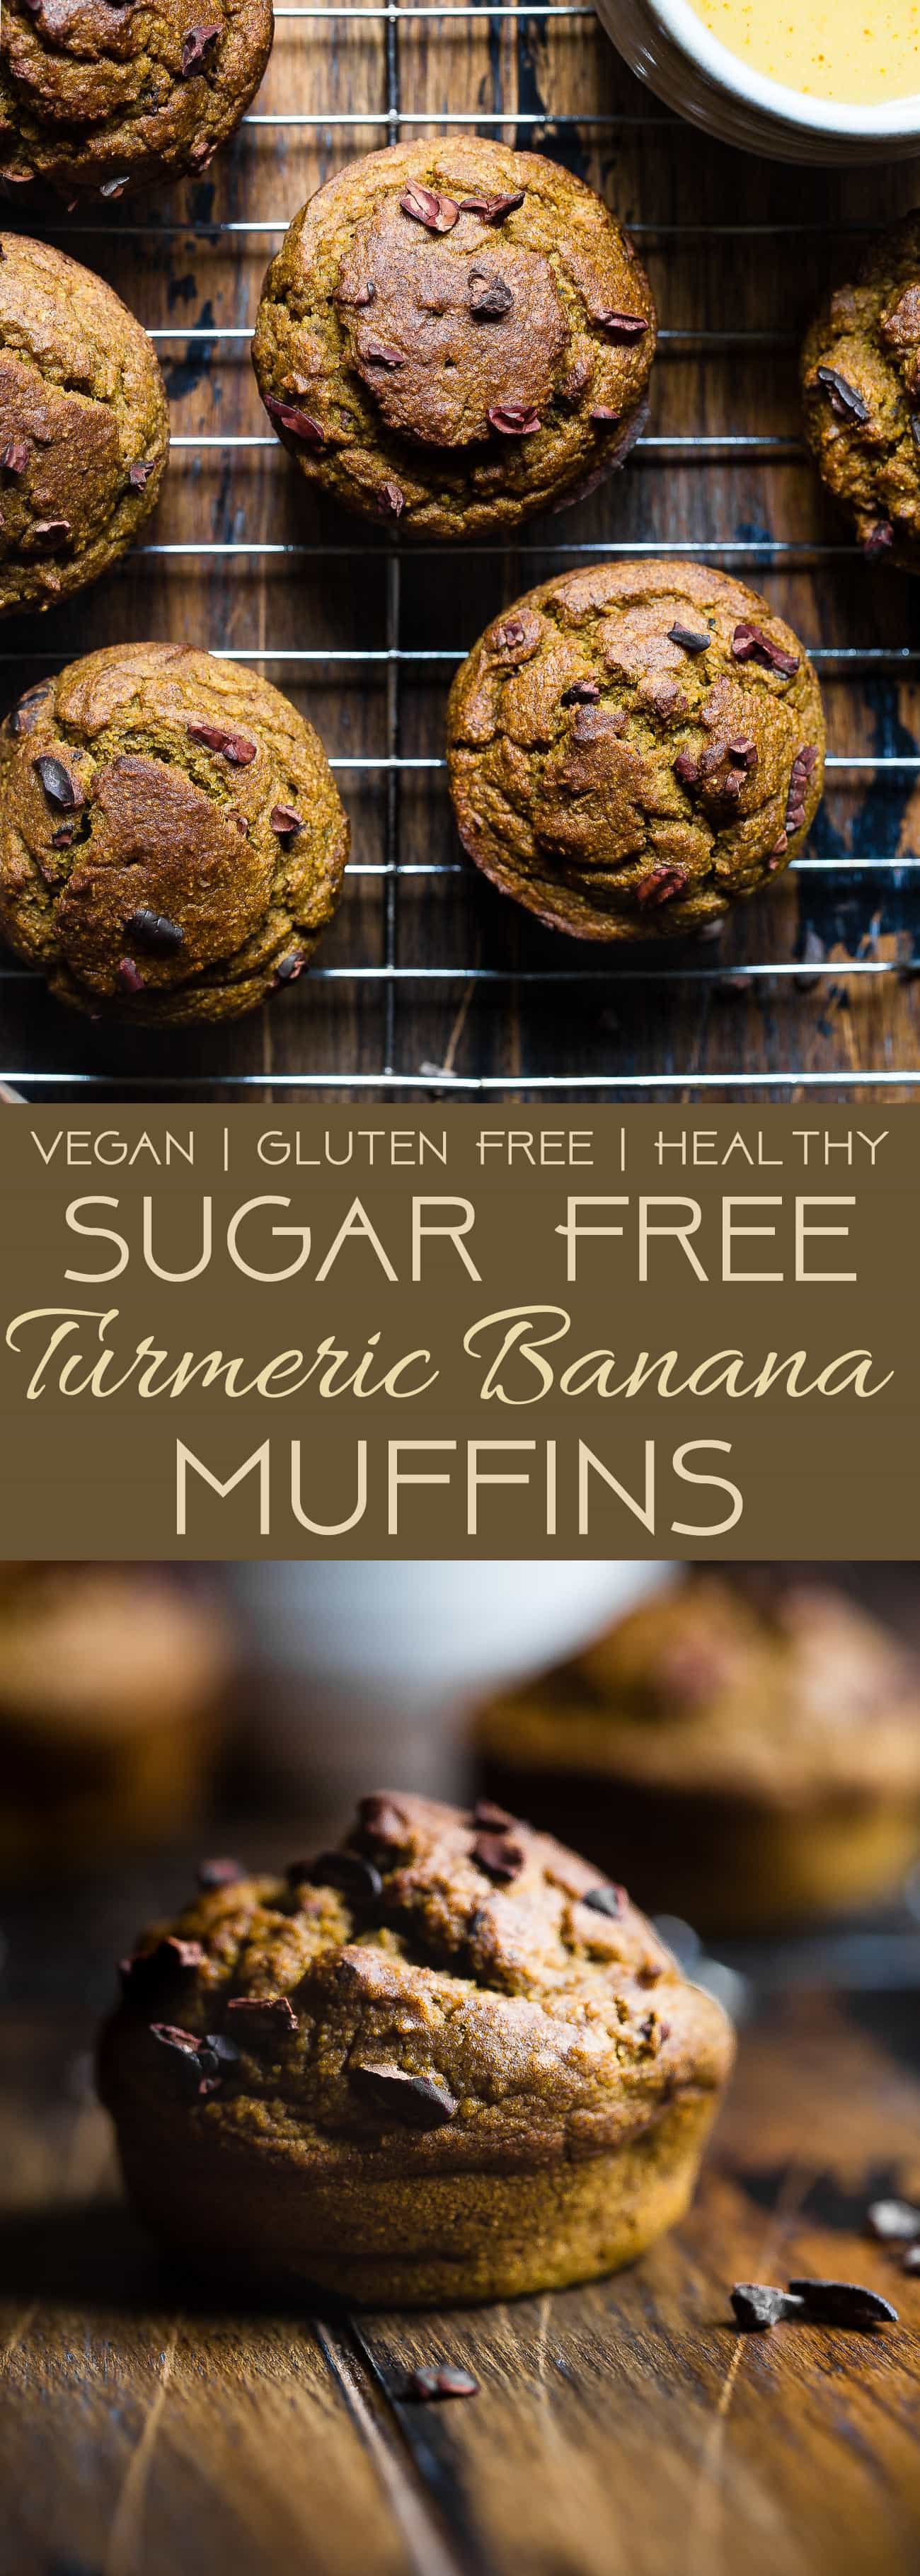 Sugar Free Turmeric Banana Muffins - These anti-inflammatory, healthy banana muffins are loaded with crunchy cocoa nibs! Gluten free, vegan friendly, low fat and only 180 calories! Perfect for a quick breakfast! | Foodfaithfitness.com | @FoodFaitFit